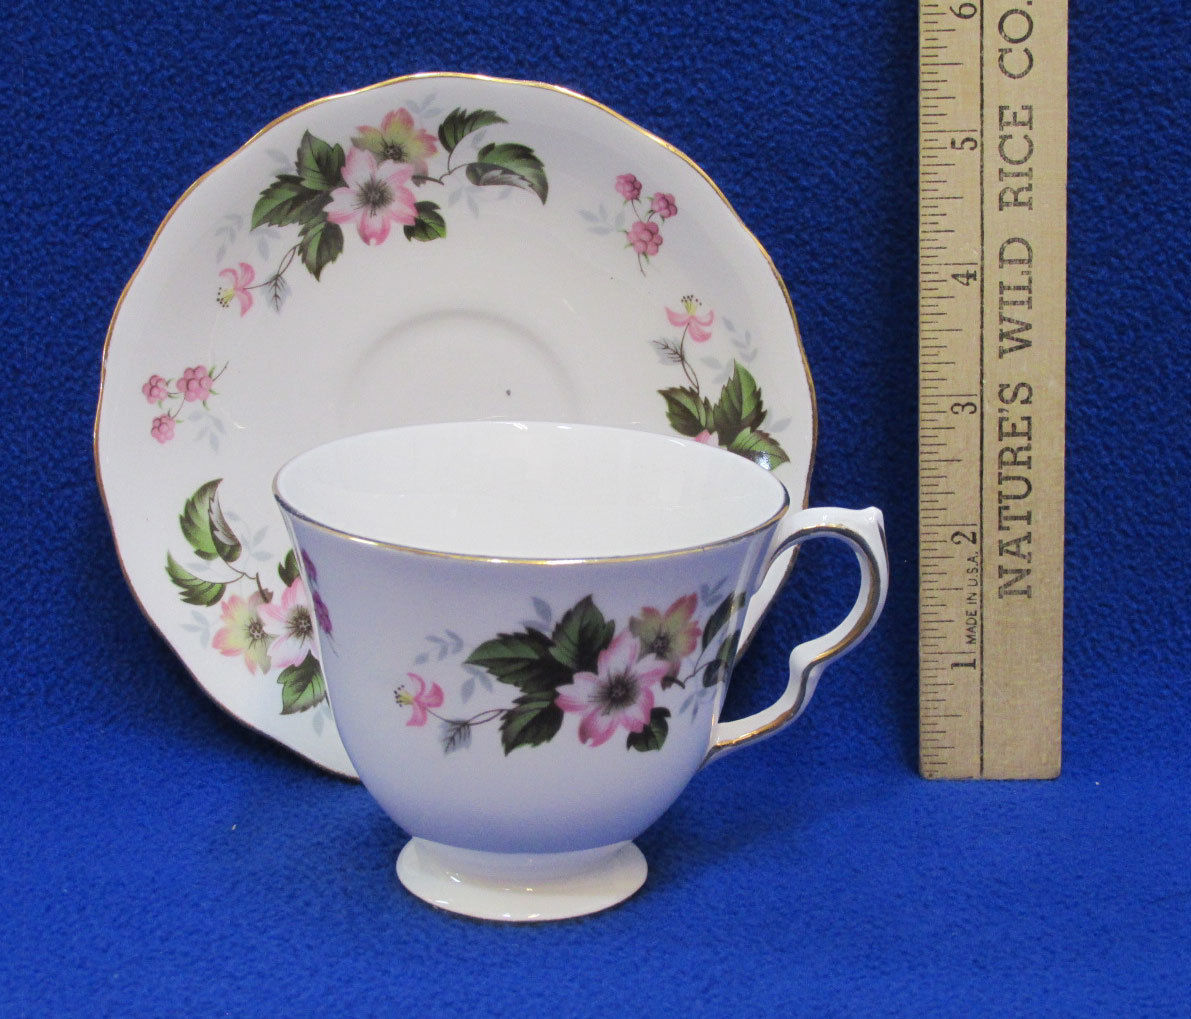 Queen Anne Tea Cup & Saucer Plate Bone China England Pink Yellow Floral Flowers - $13.16